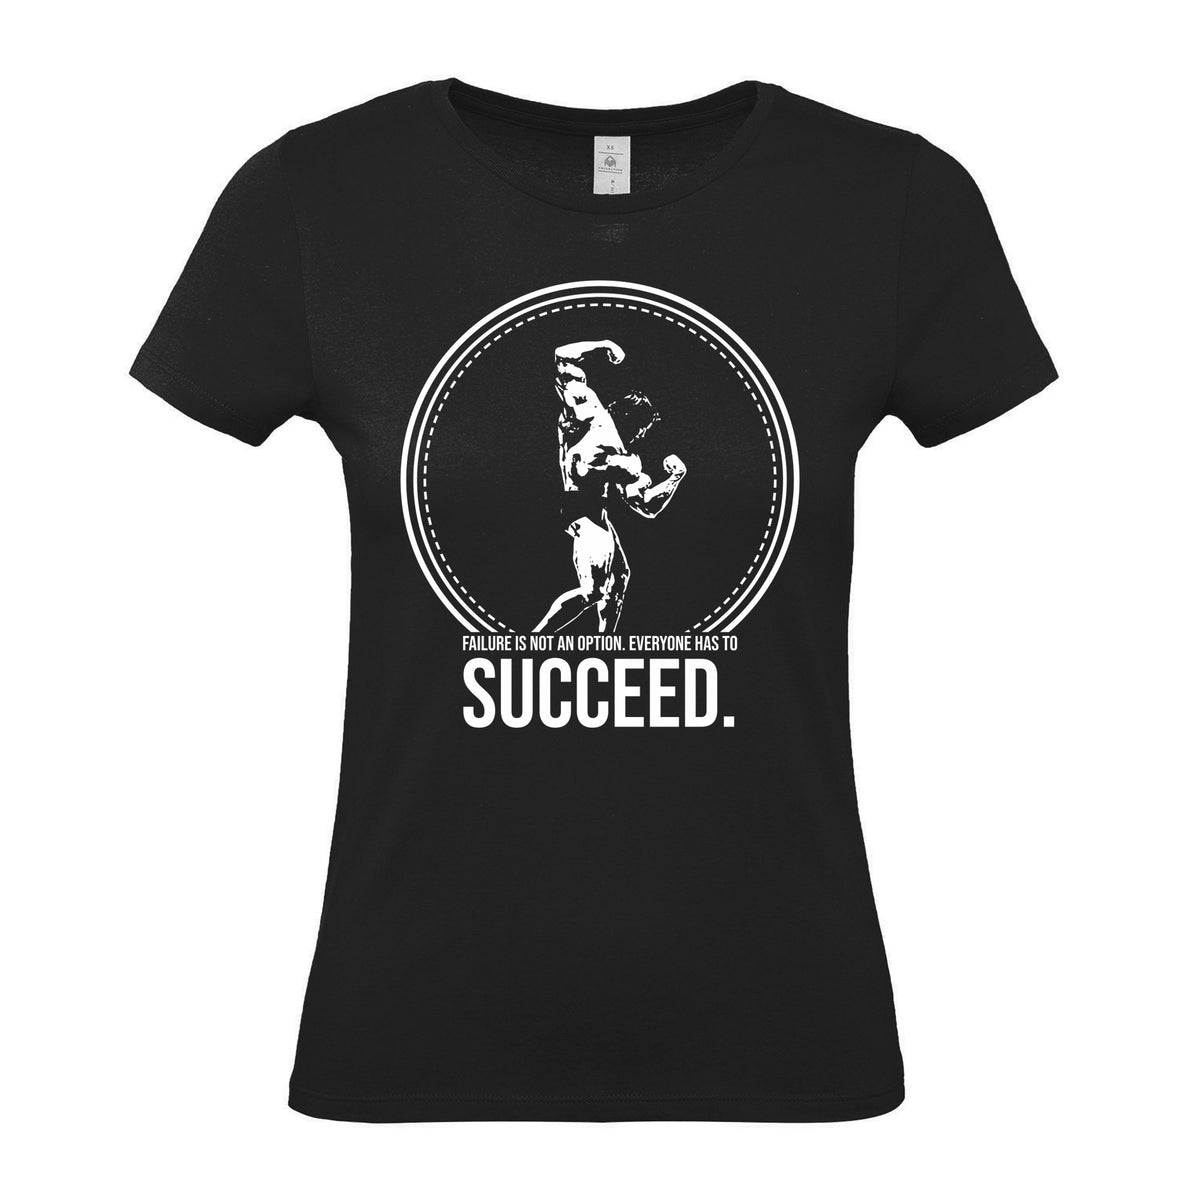 Arnold Succeed - Women's Gym T-Shirt